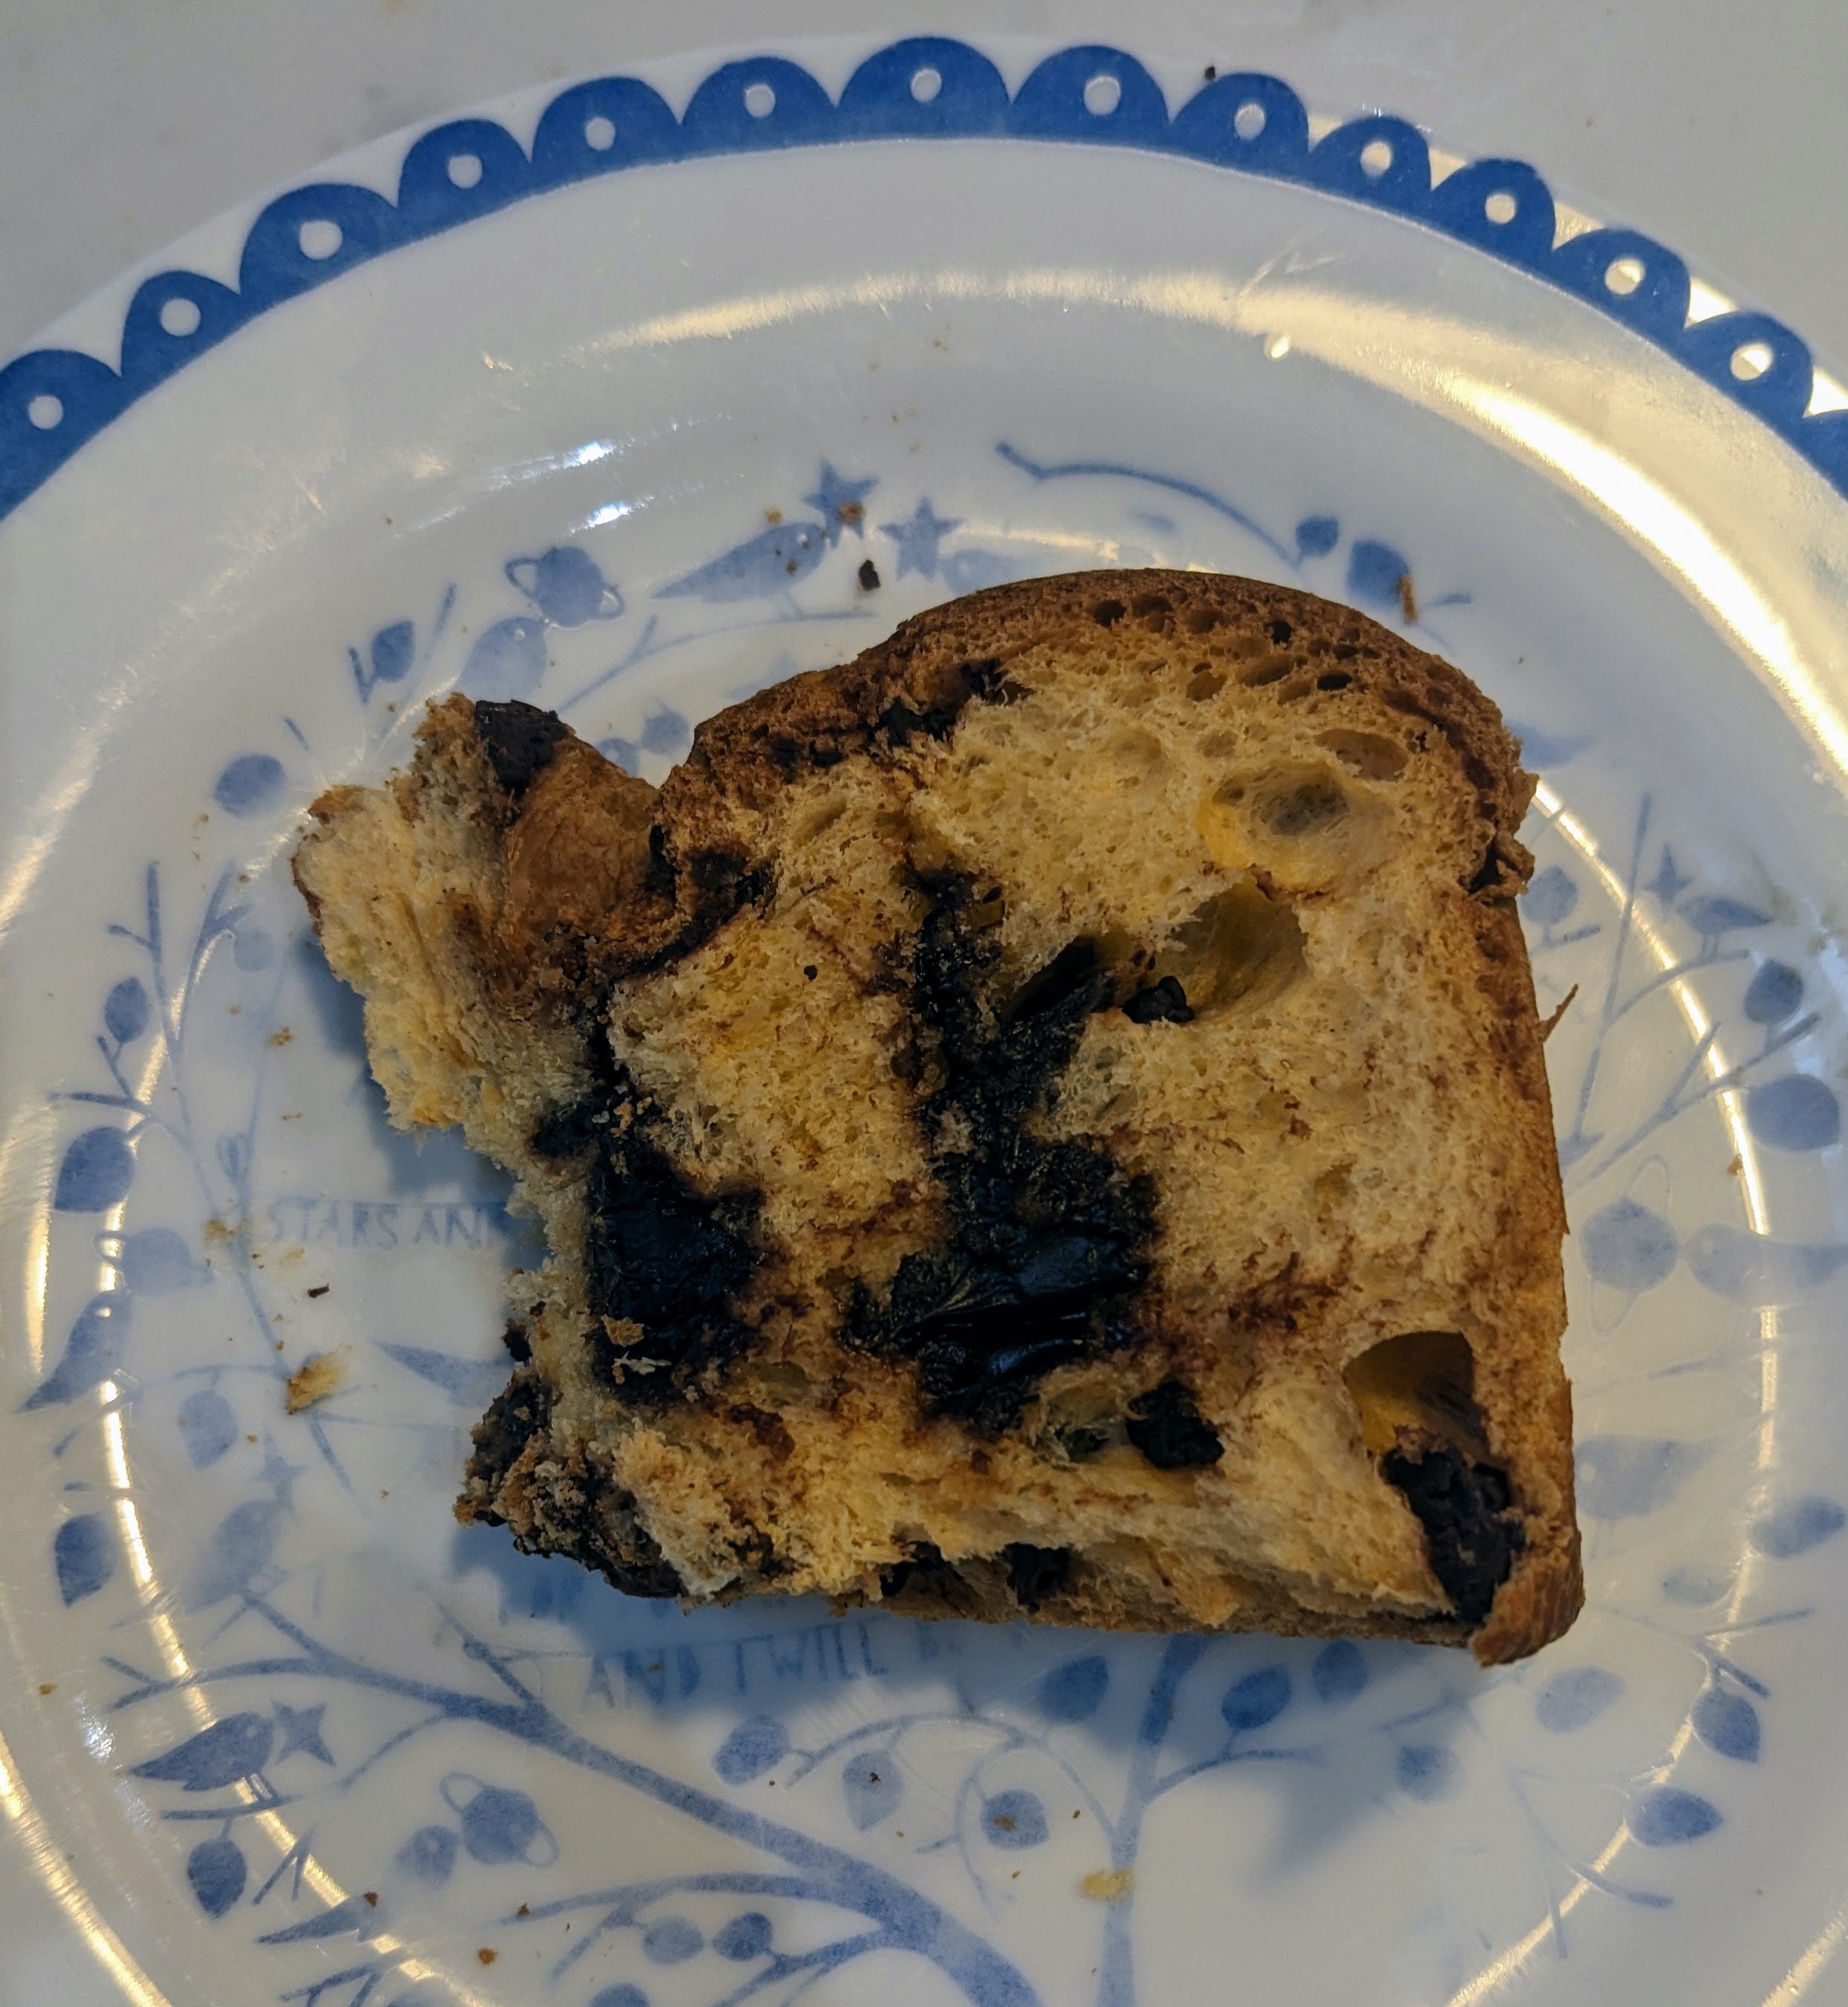 A slice of chocolate panettone sits on a blue and white patterned plate